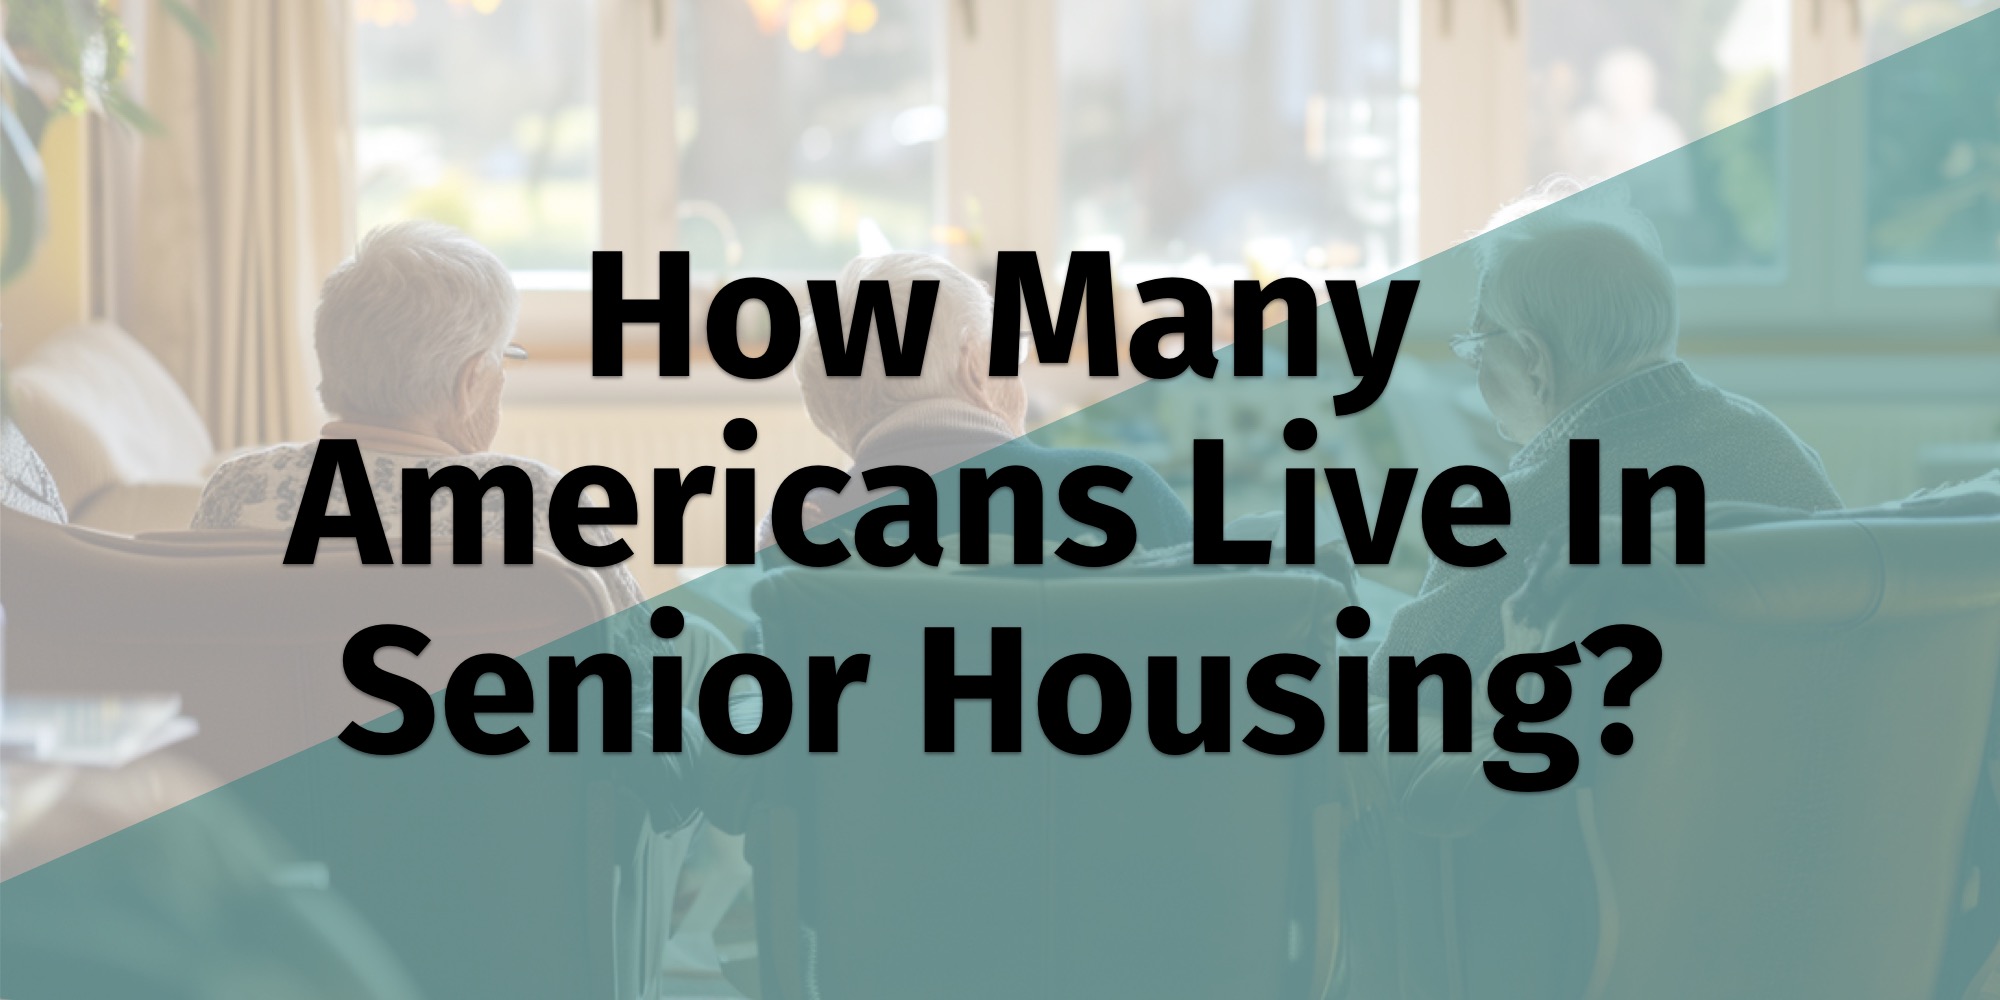 How many americans live in Senior Housing